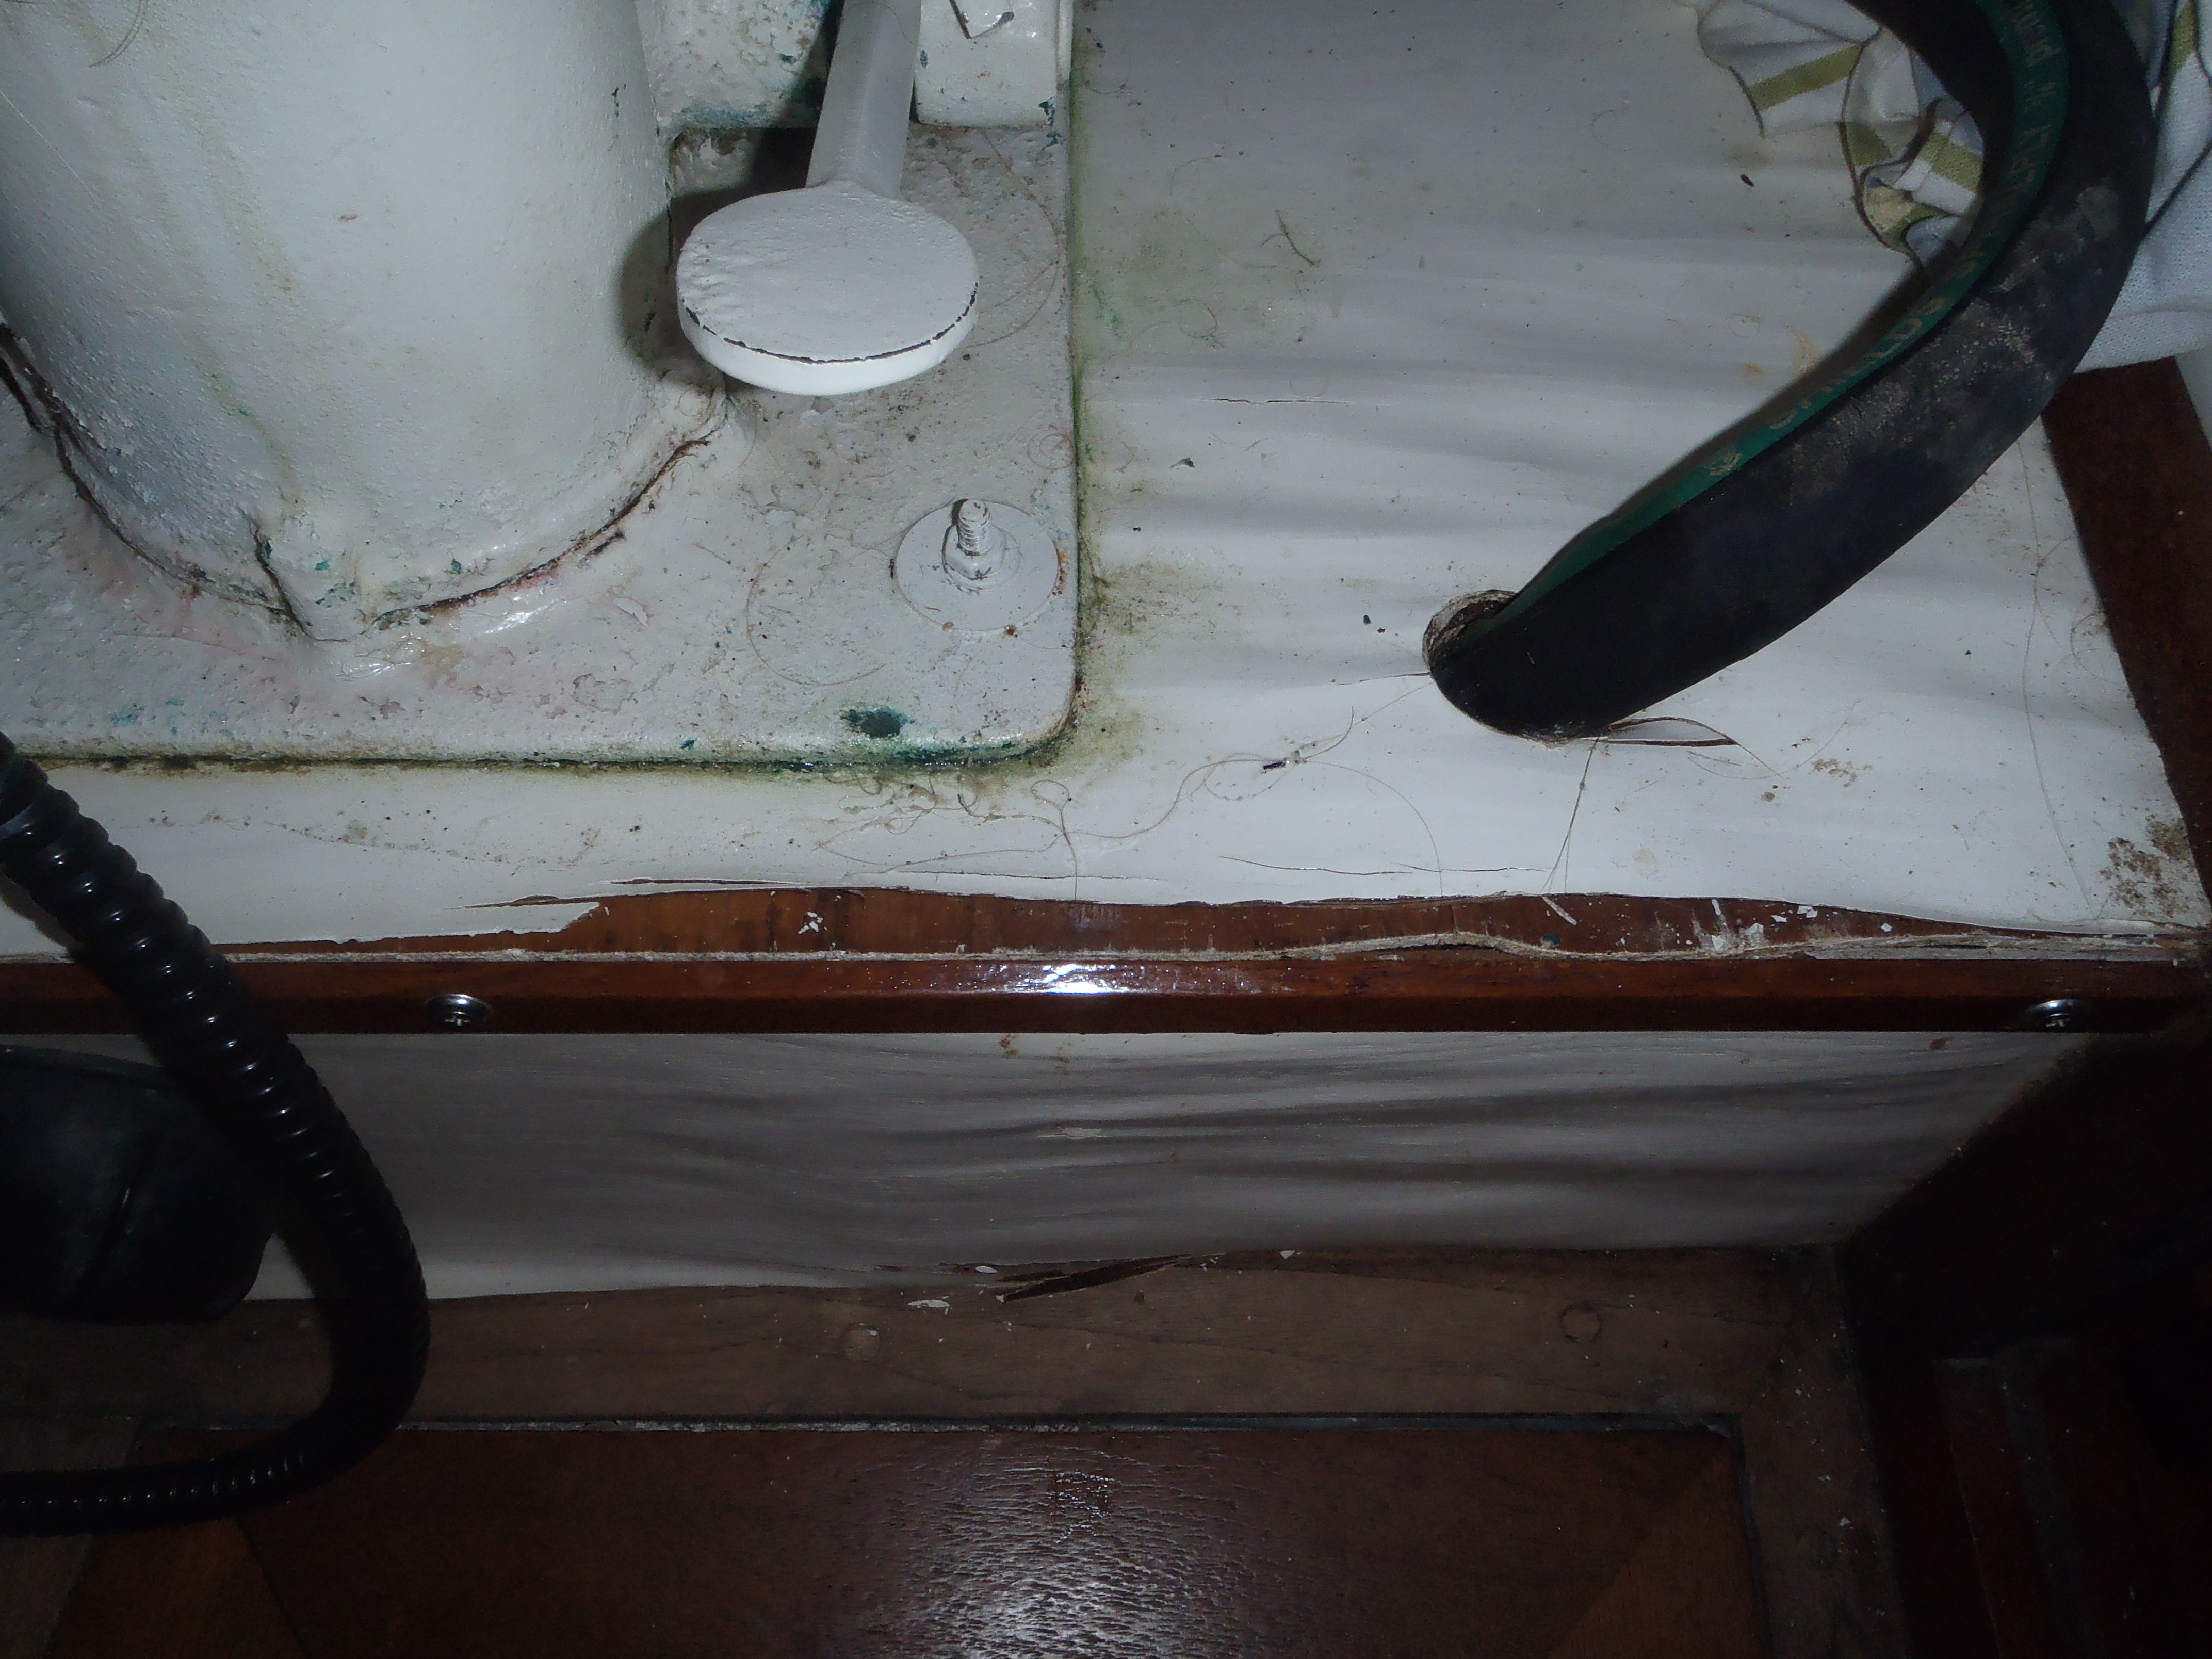 Wood deterioration at the mounting base of this toilet indicates a leak